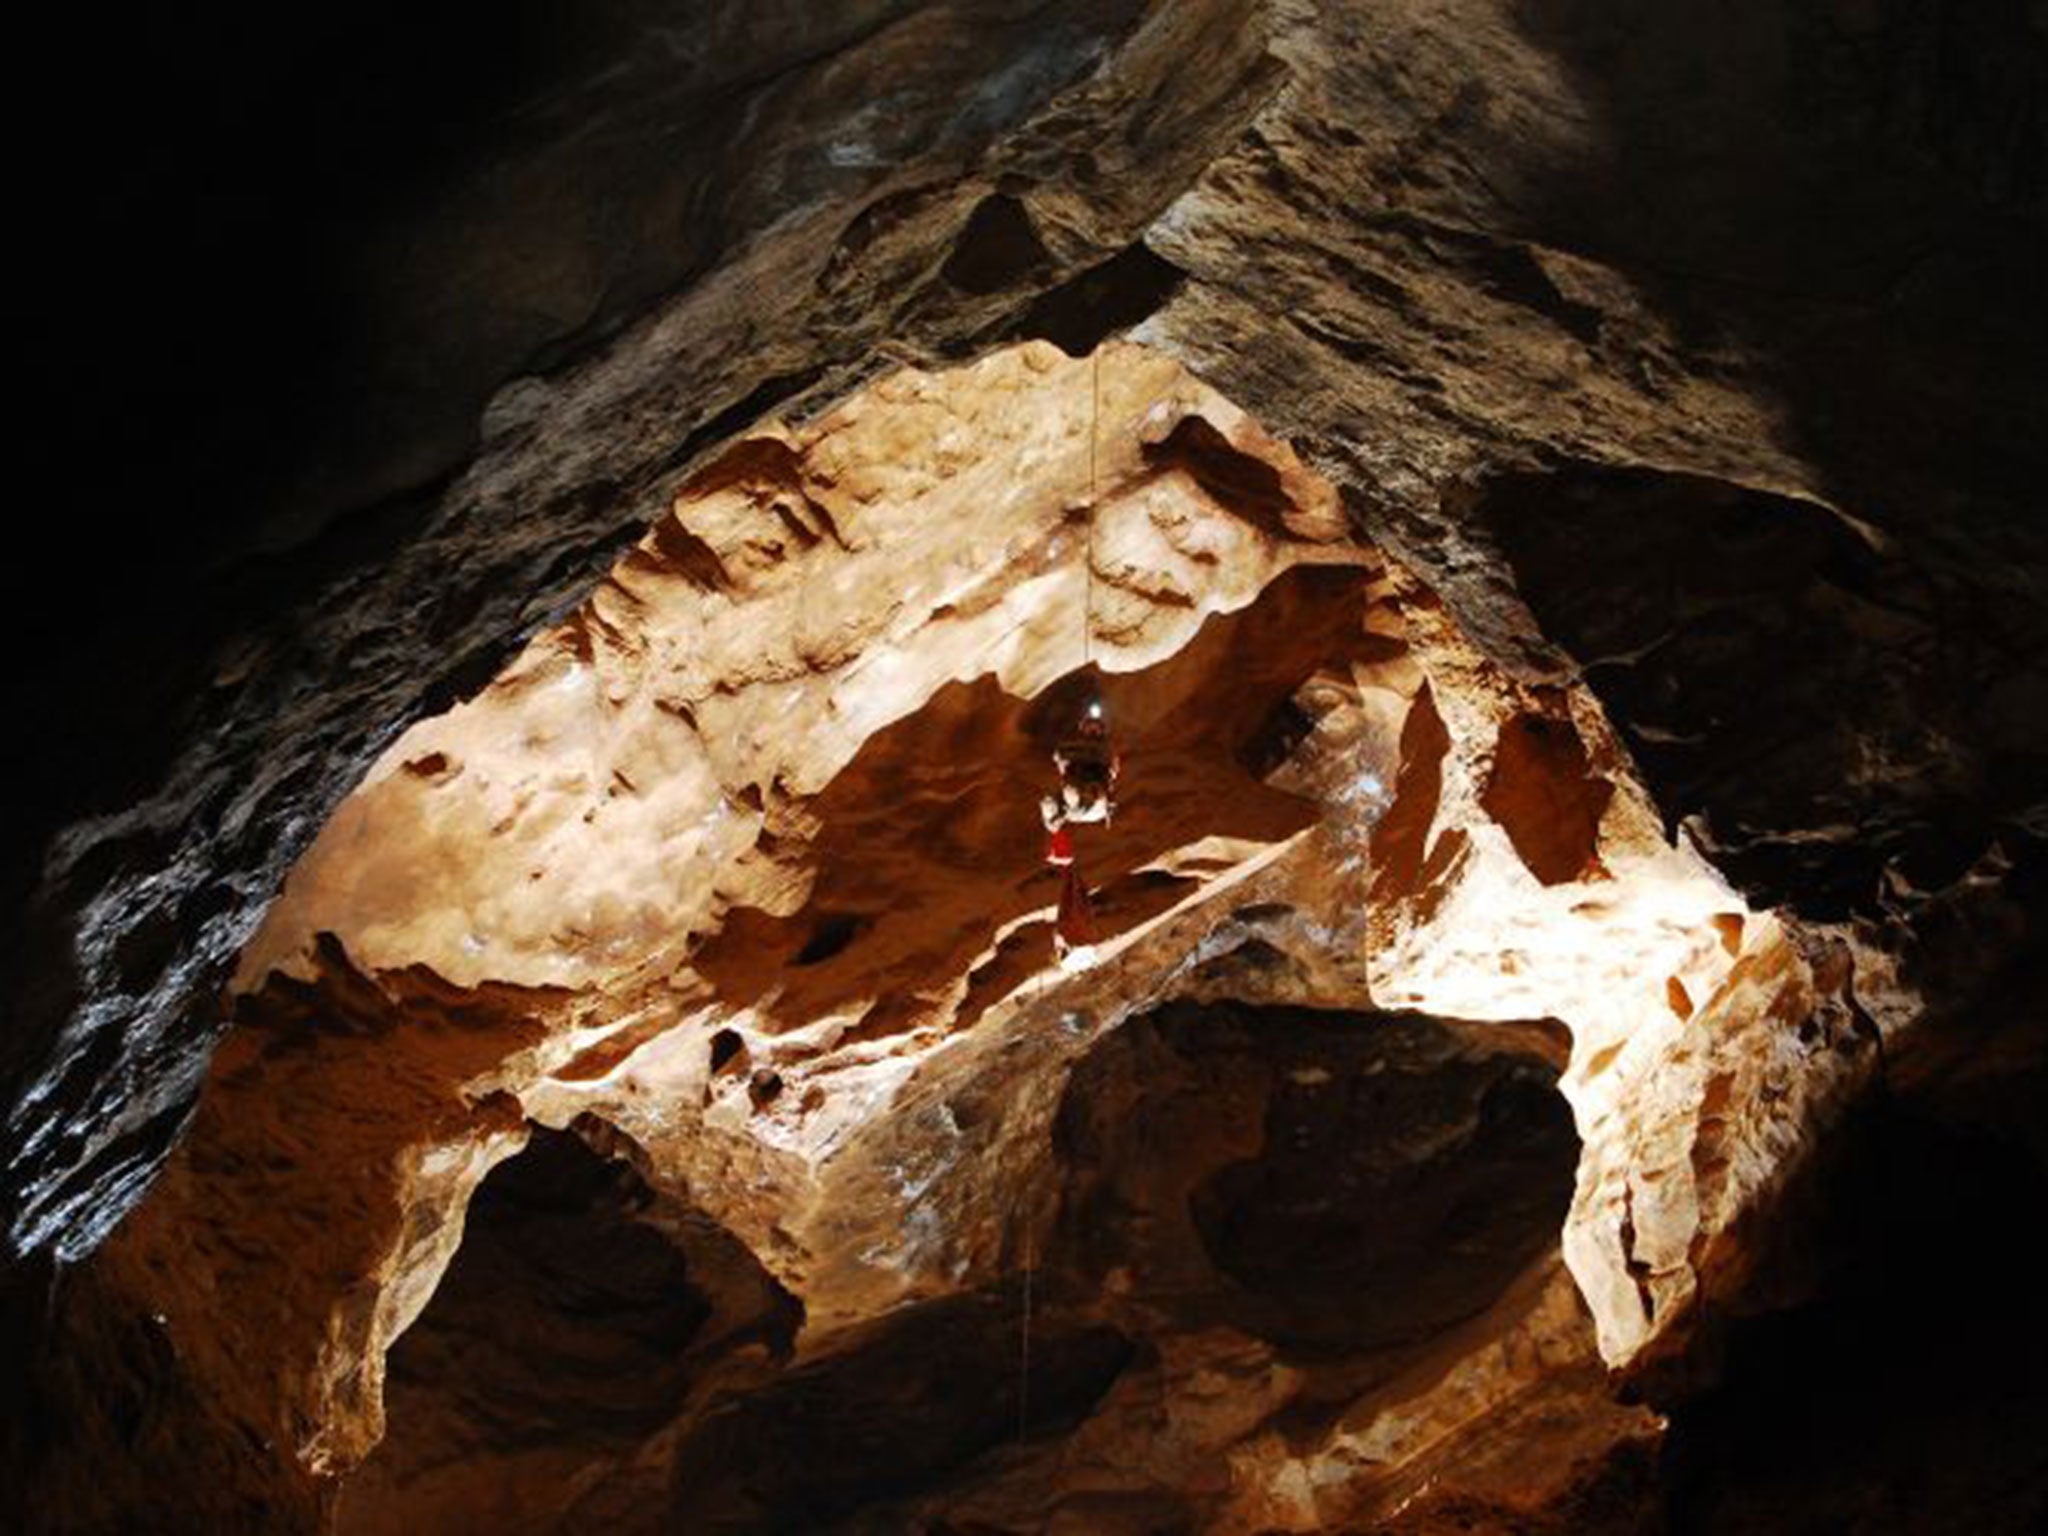 Inside the massive Riesending cave complex 